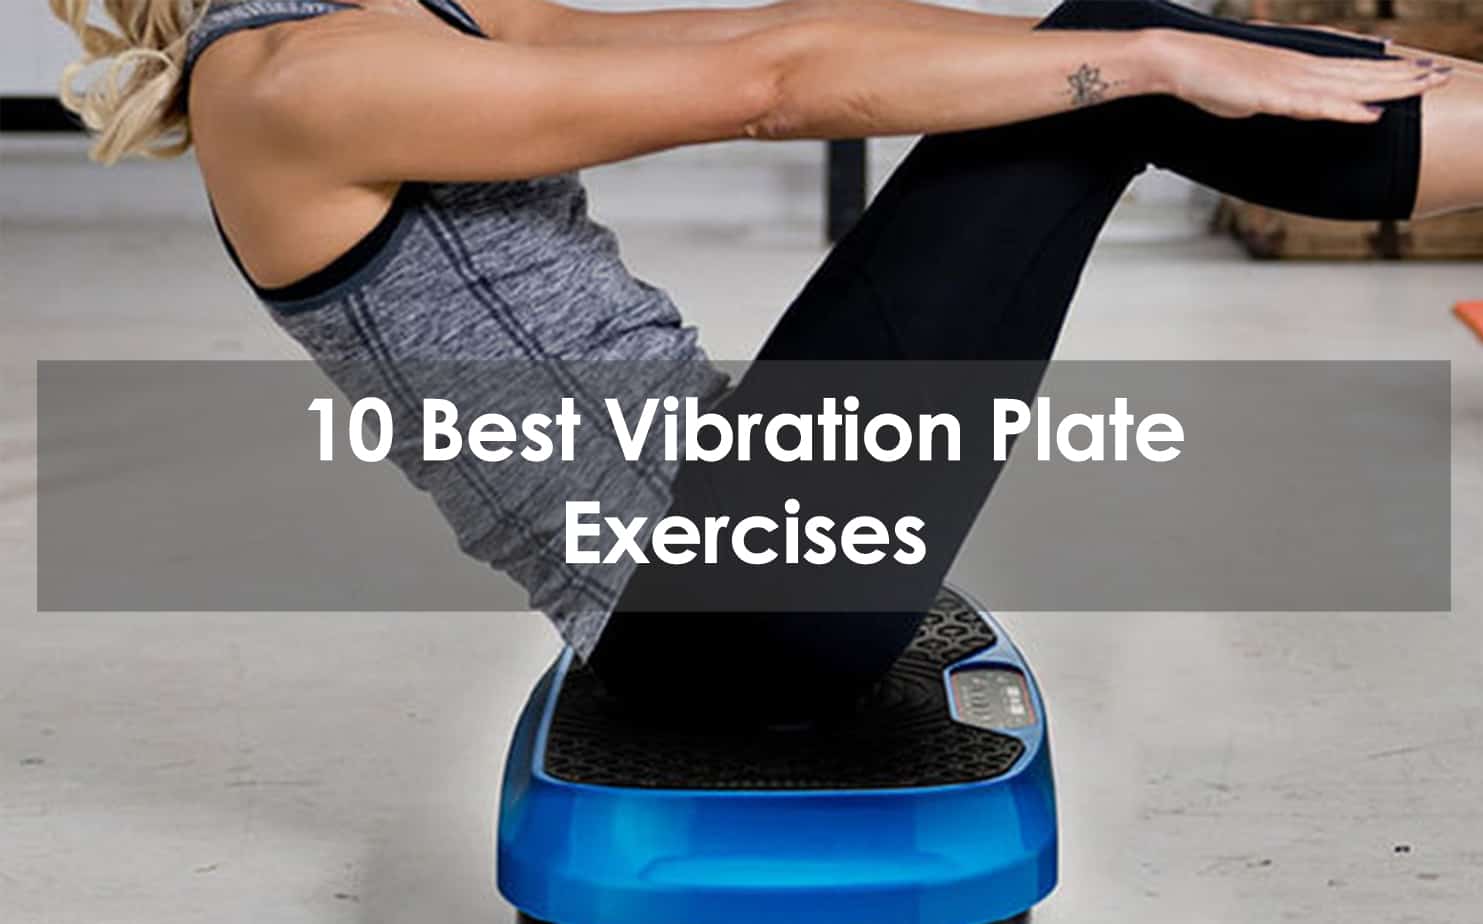 What Are The Best Exercises To Do On A Vibration Plate